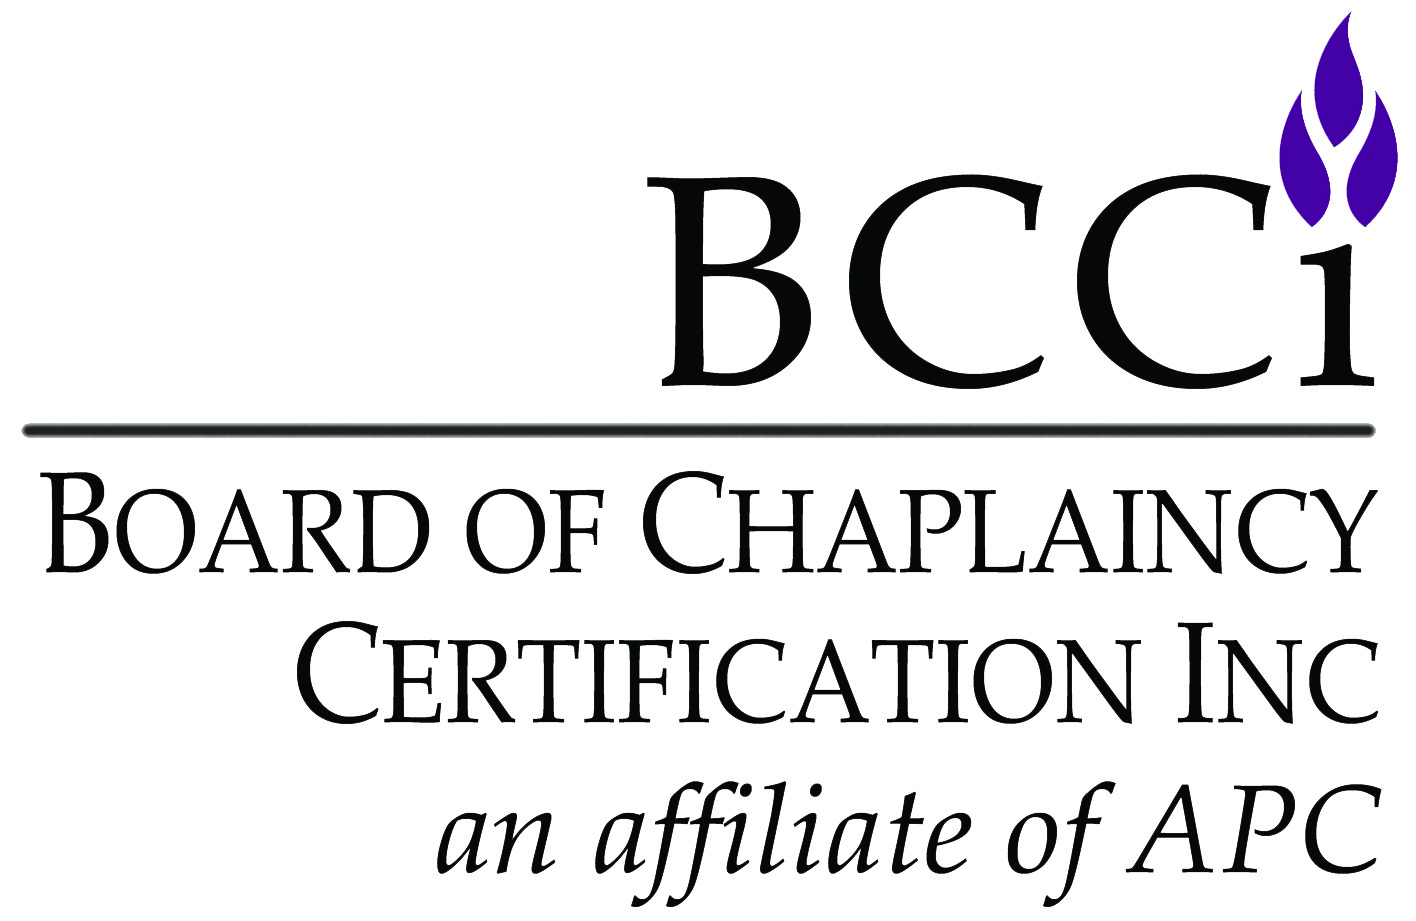 BOARD OF CHAPLAINCY CERTIFICATION INC AN AFFILIATE OF ASSOCIATION